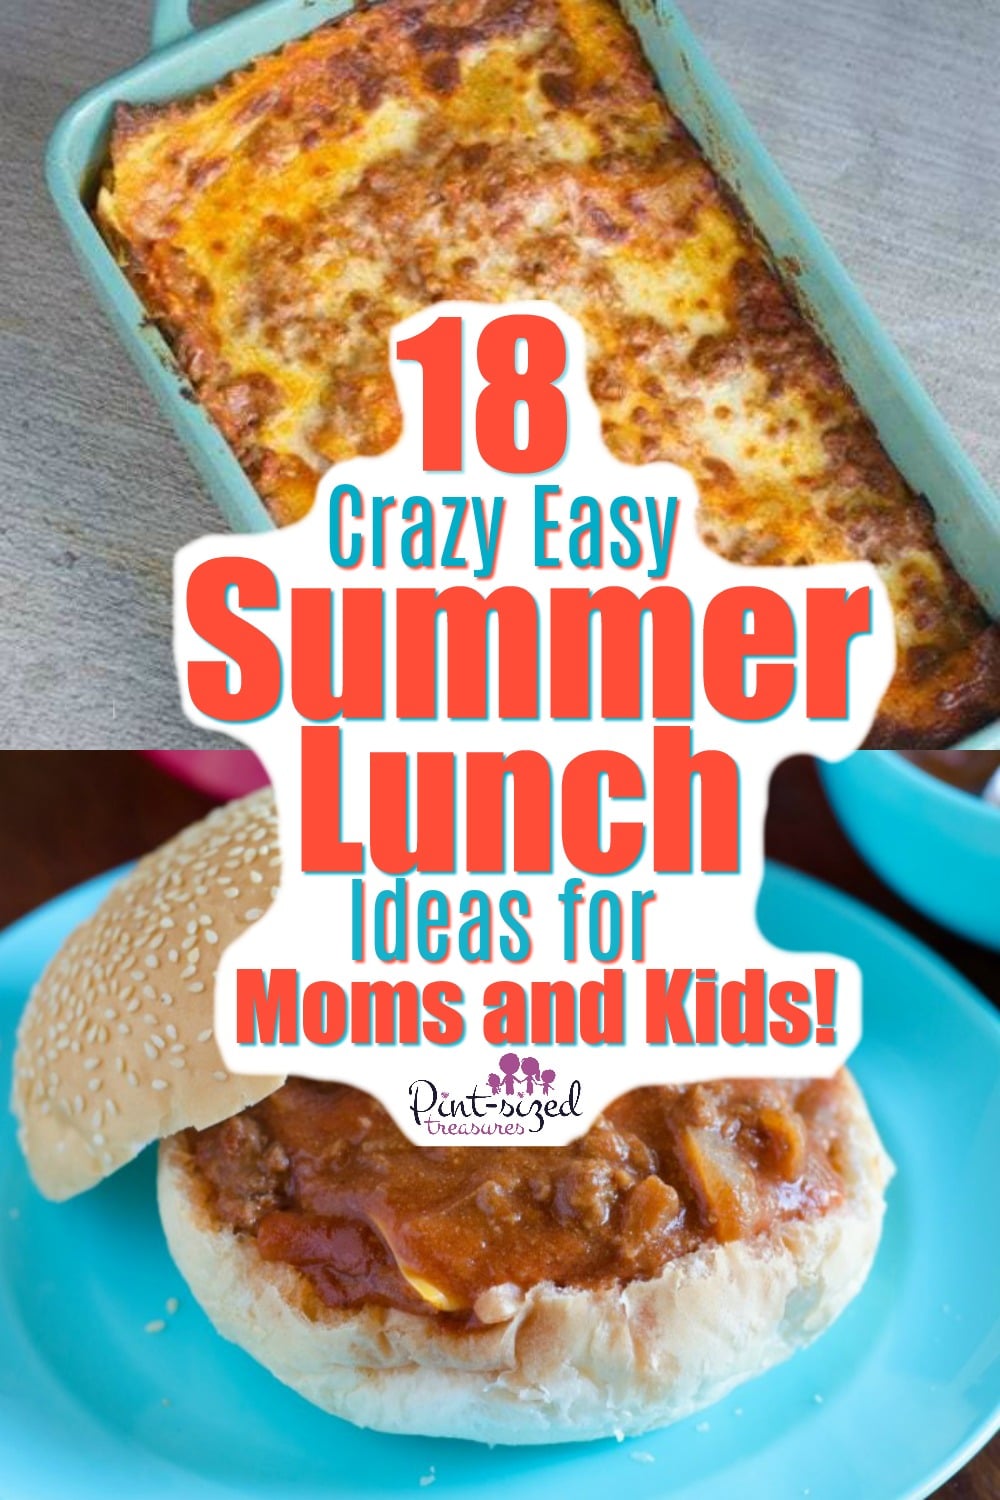 18 Crazy Easy Summer Lunch Ideas For Moms And Kids Pint Sized Treasures,Pork Stir Fry Sauce